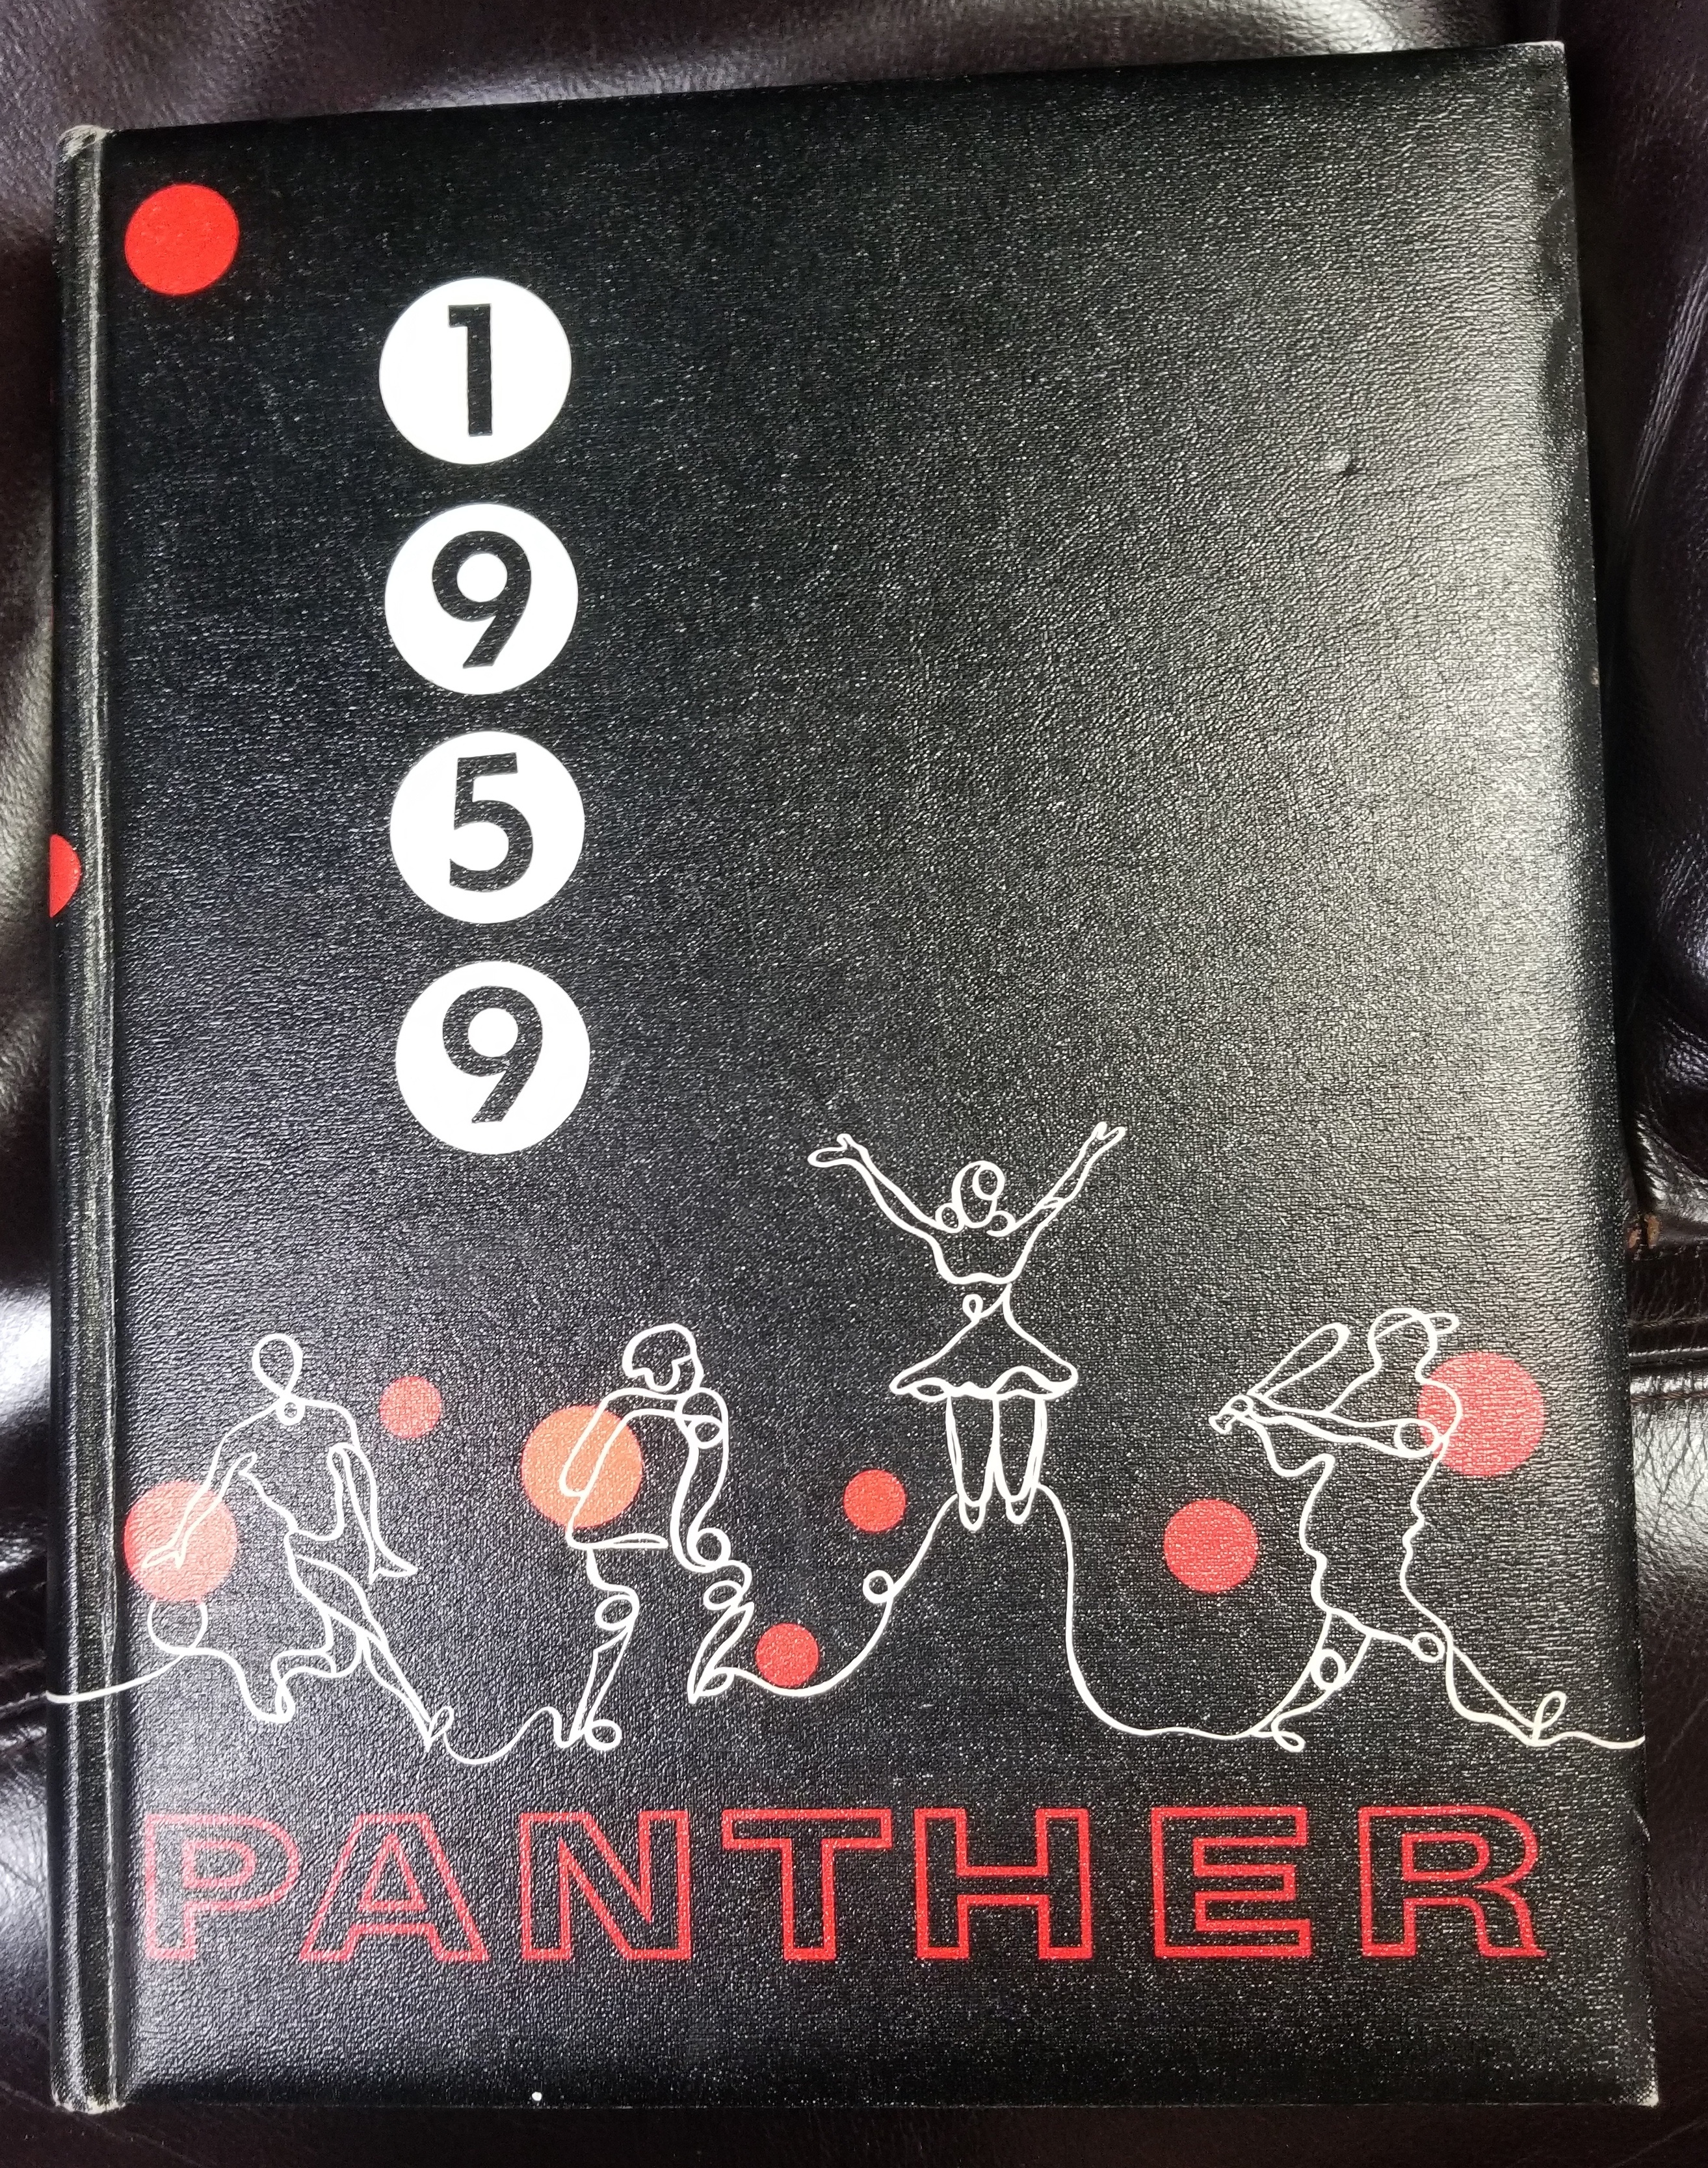 Image for The Panther, West High School, Salt Lake City, Utah Yearbook [1959]